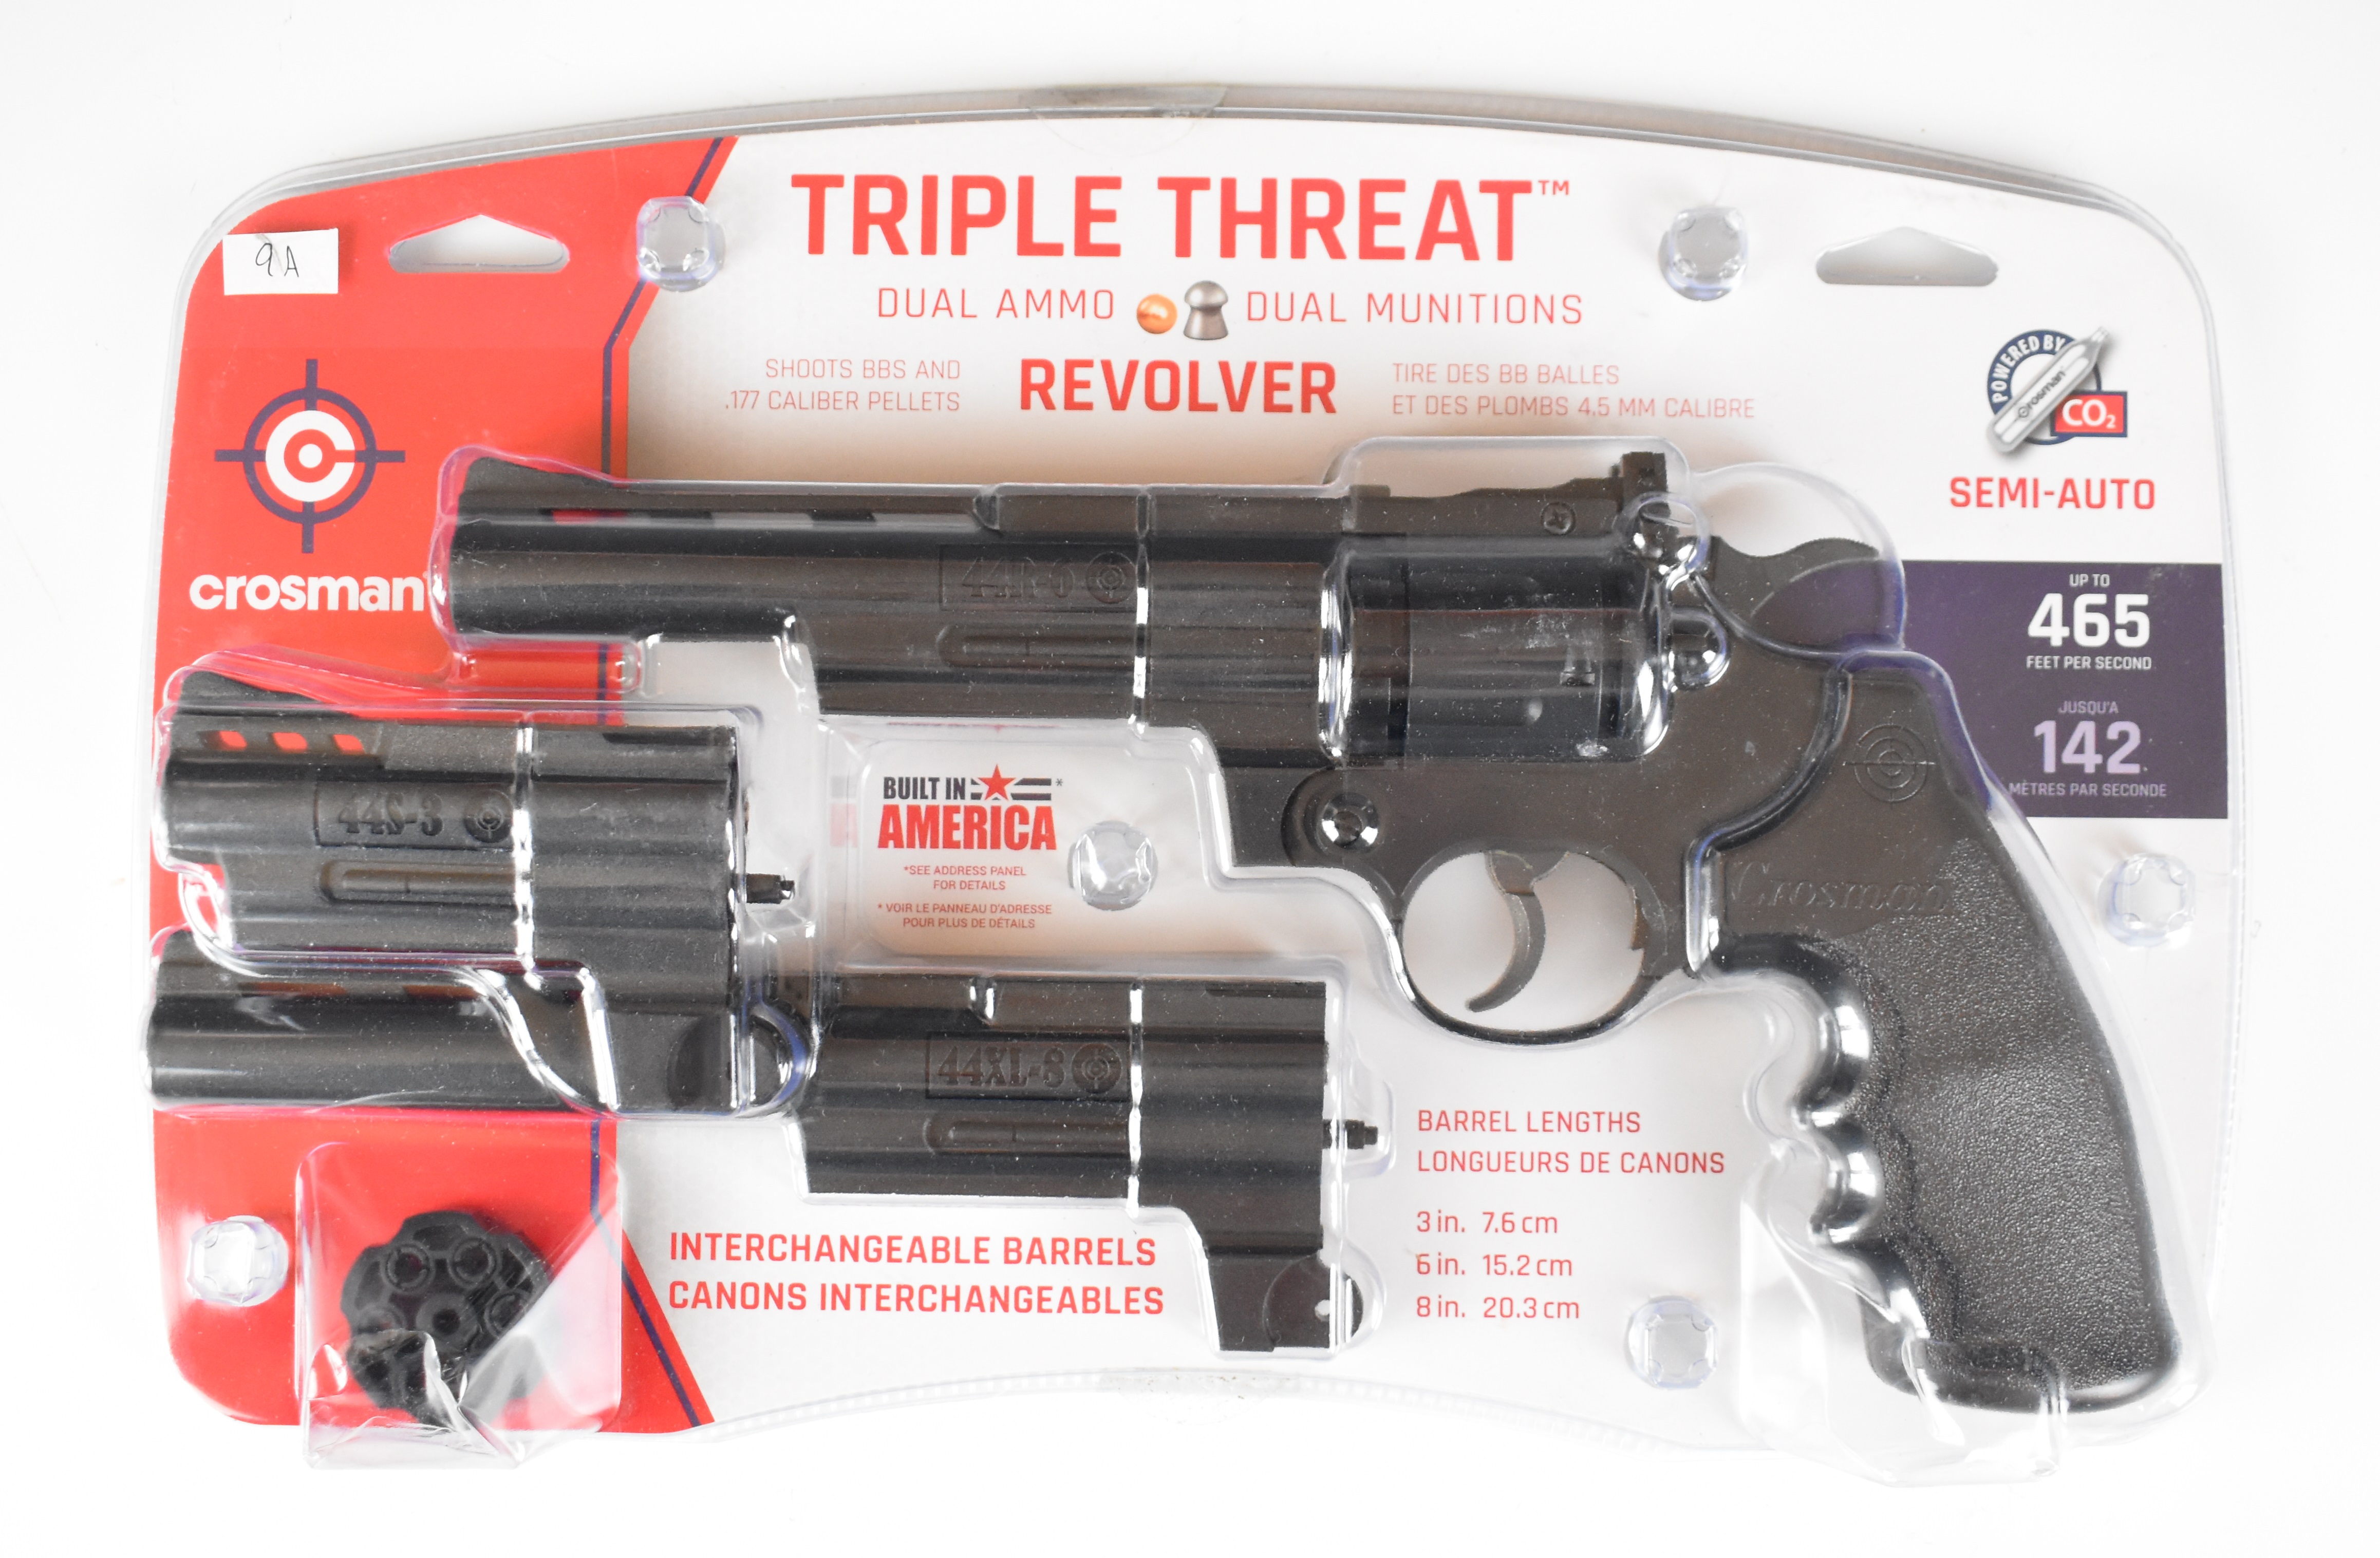 Crosman Triple Threat .177 CO2 air pistol / revolver with named and textured grips, two 6-shot